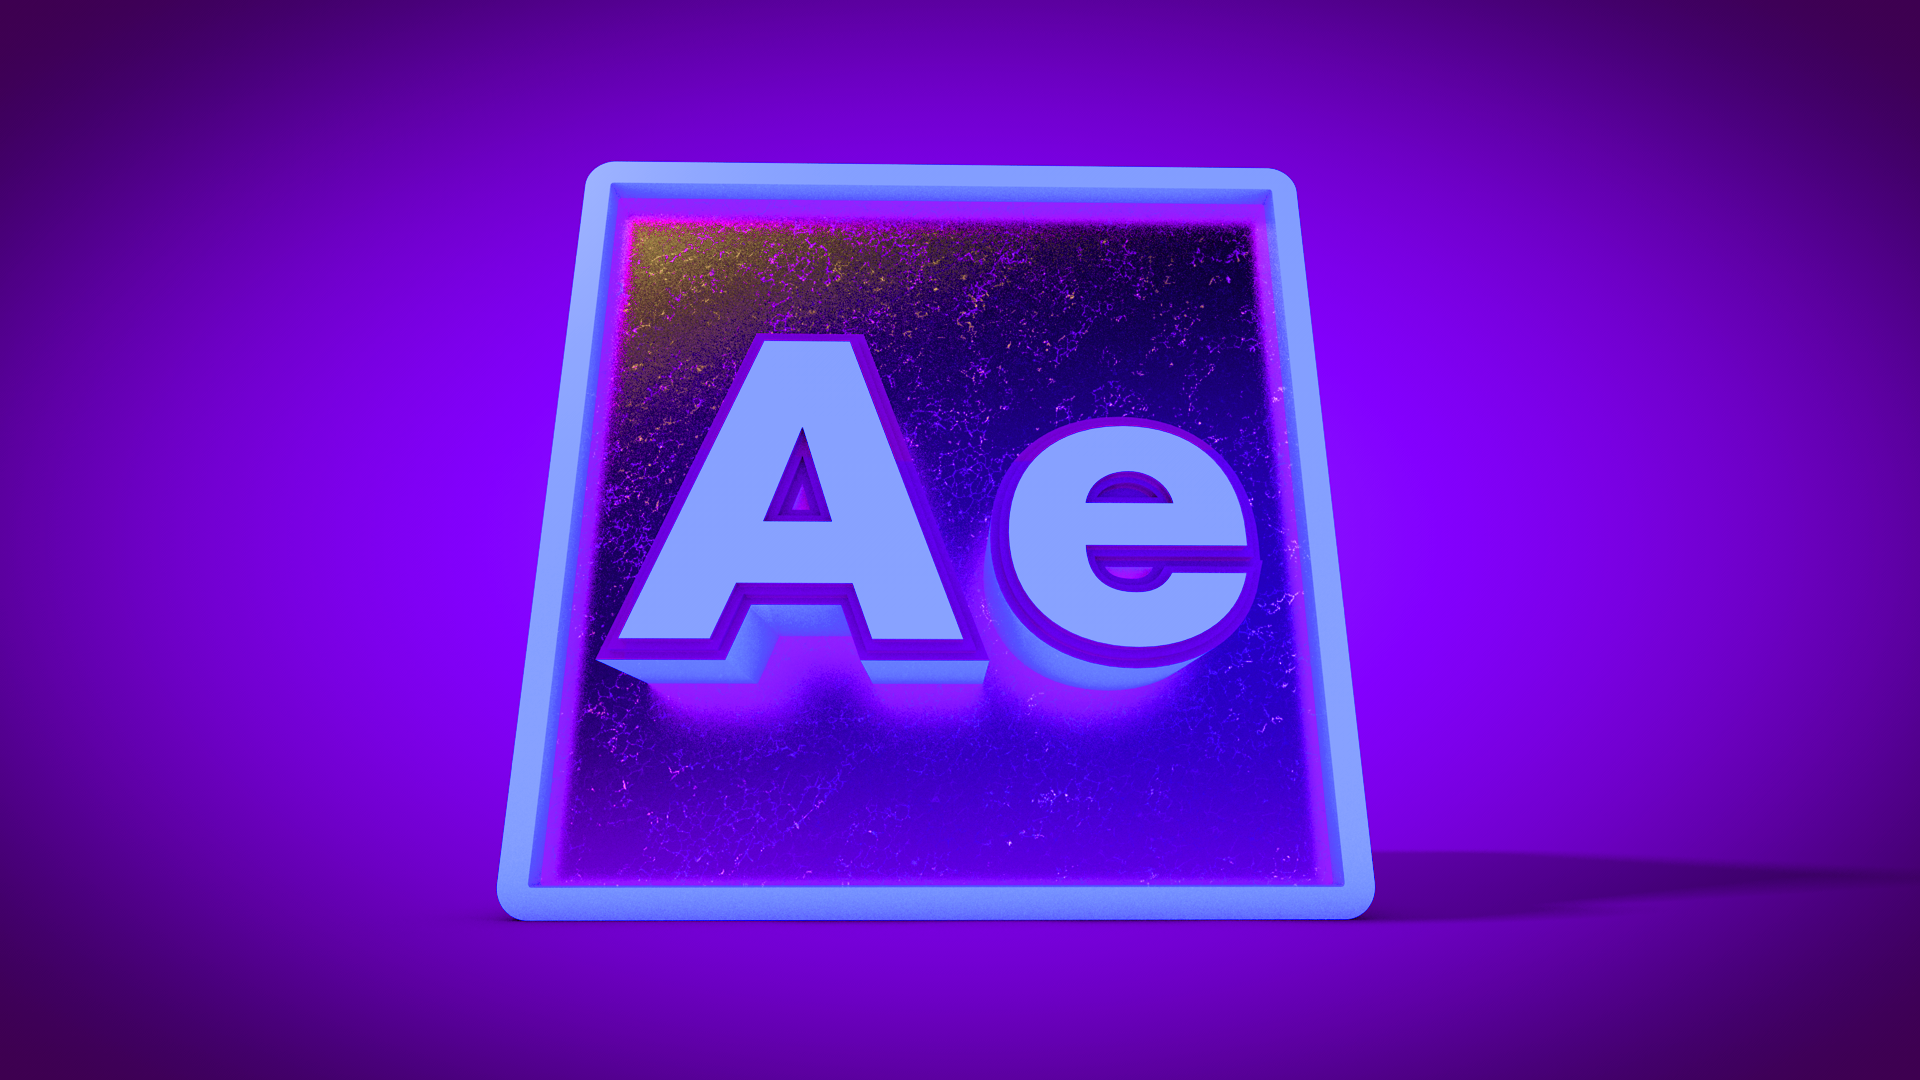 After effects packs. Adobe after Effects. Фон для Adobe after Effects. Adobe after Effects логотип. Water Effect.